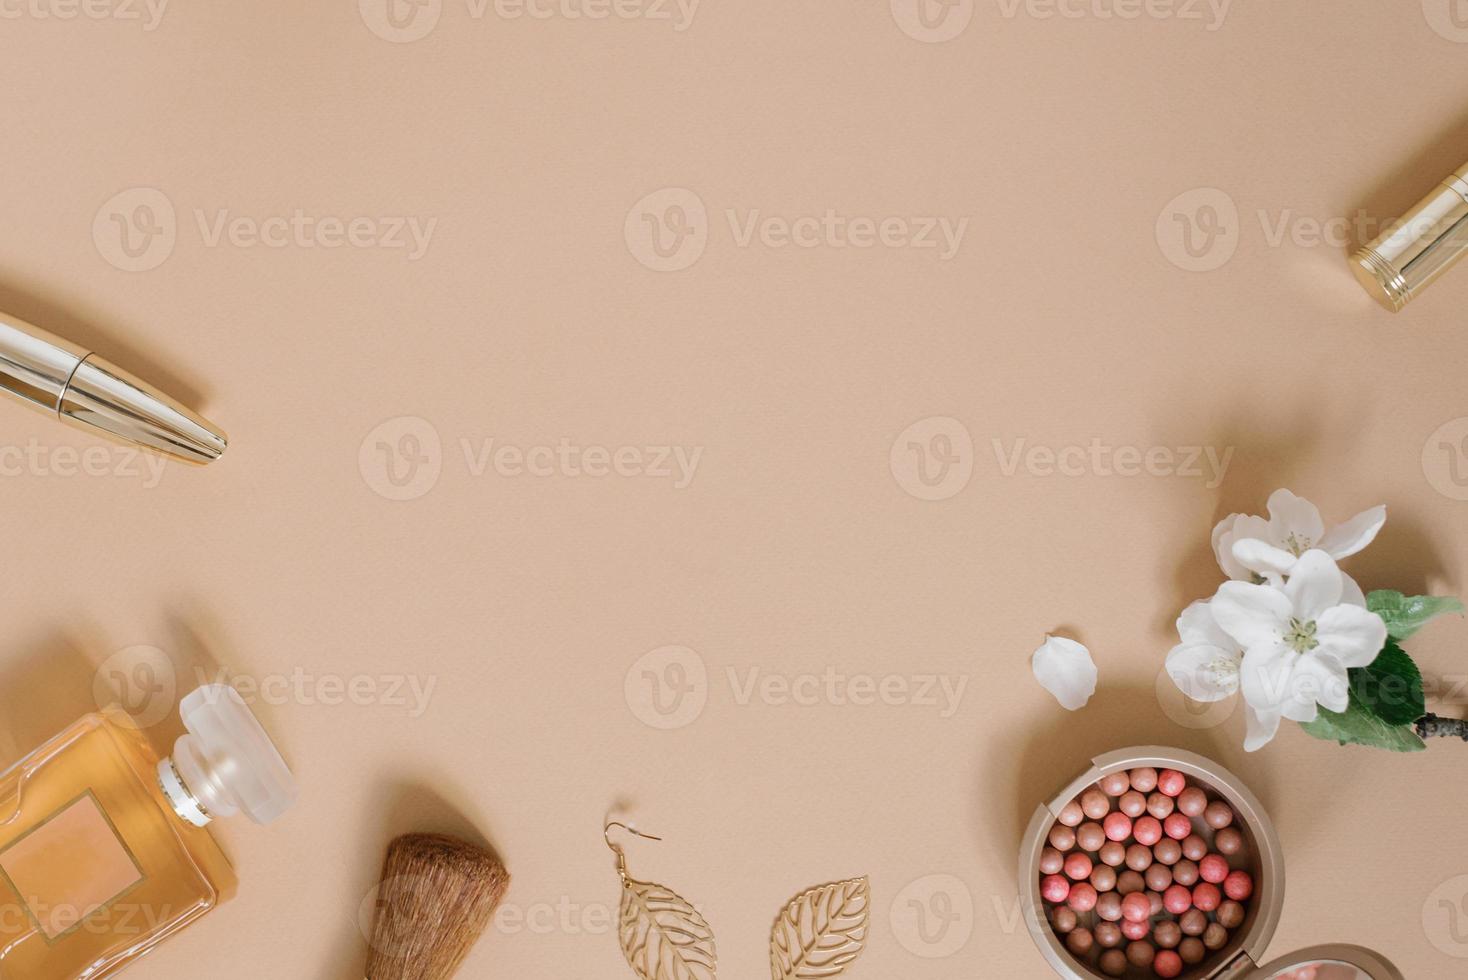 Frame with a set of makeup cosmetics, flowers and other accessories on a beige background. Composition in gold tones. Flat lay, top view. photo